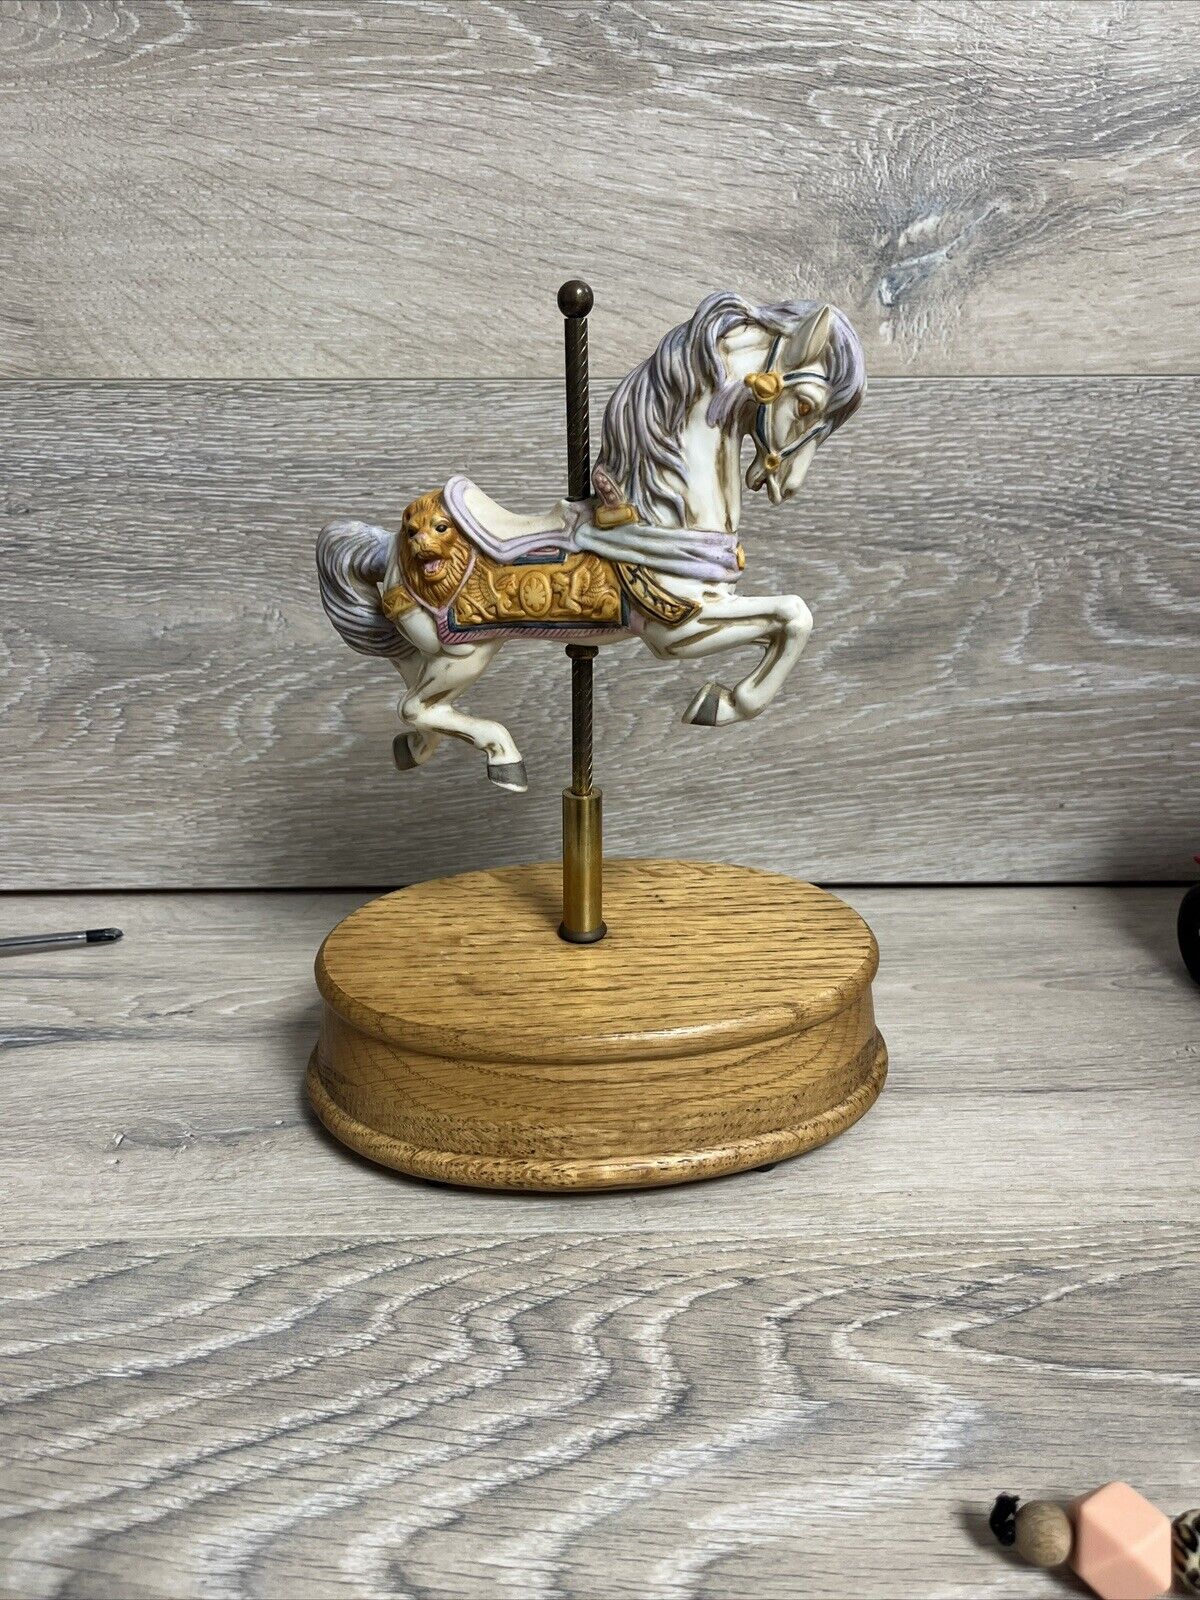 Vintage Musical Willets Design Carousel Horse Plays Tales From The Vienna Woods